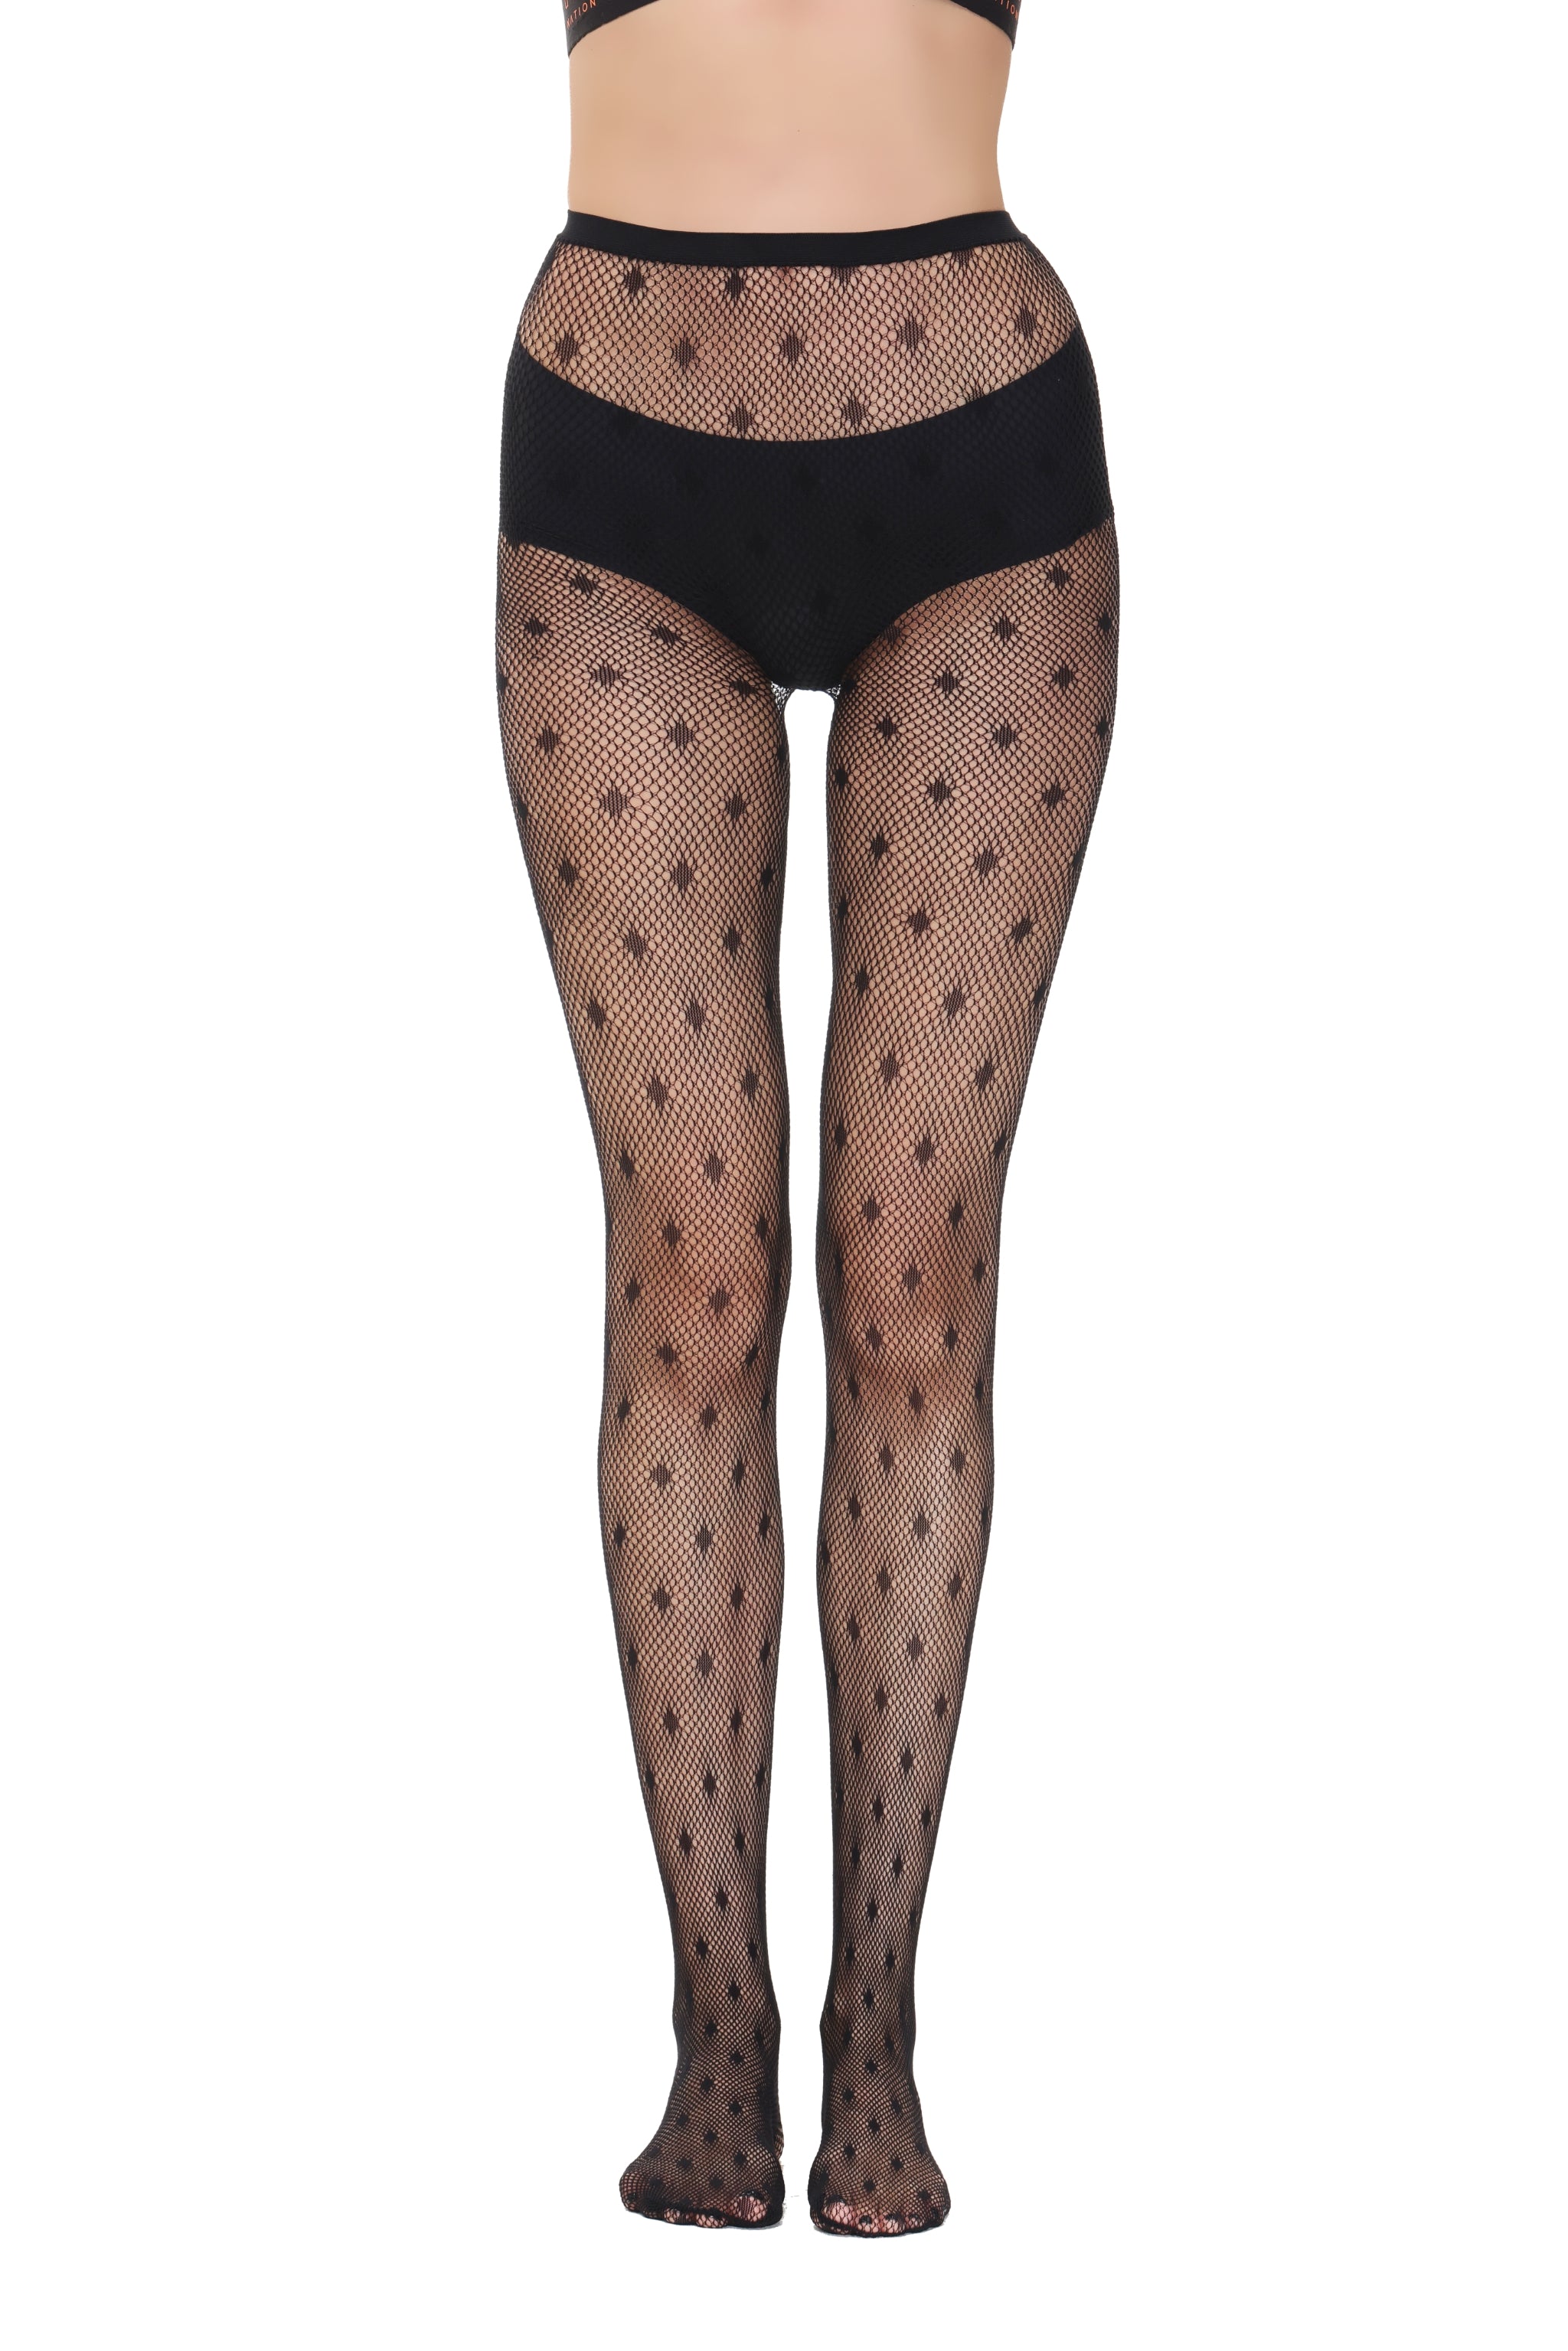 Fishnet Tights 110985-5 Front